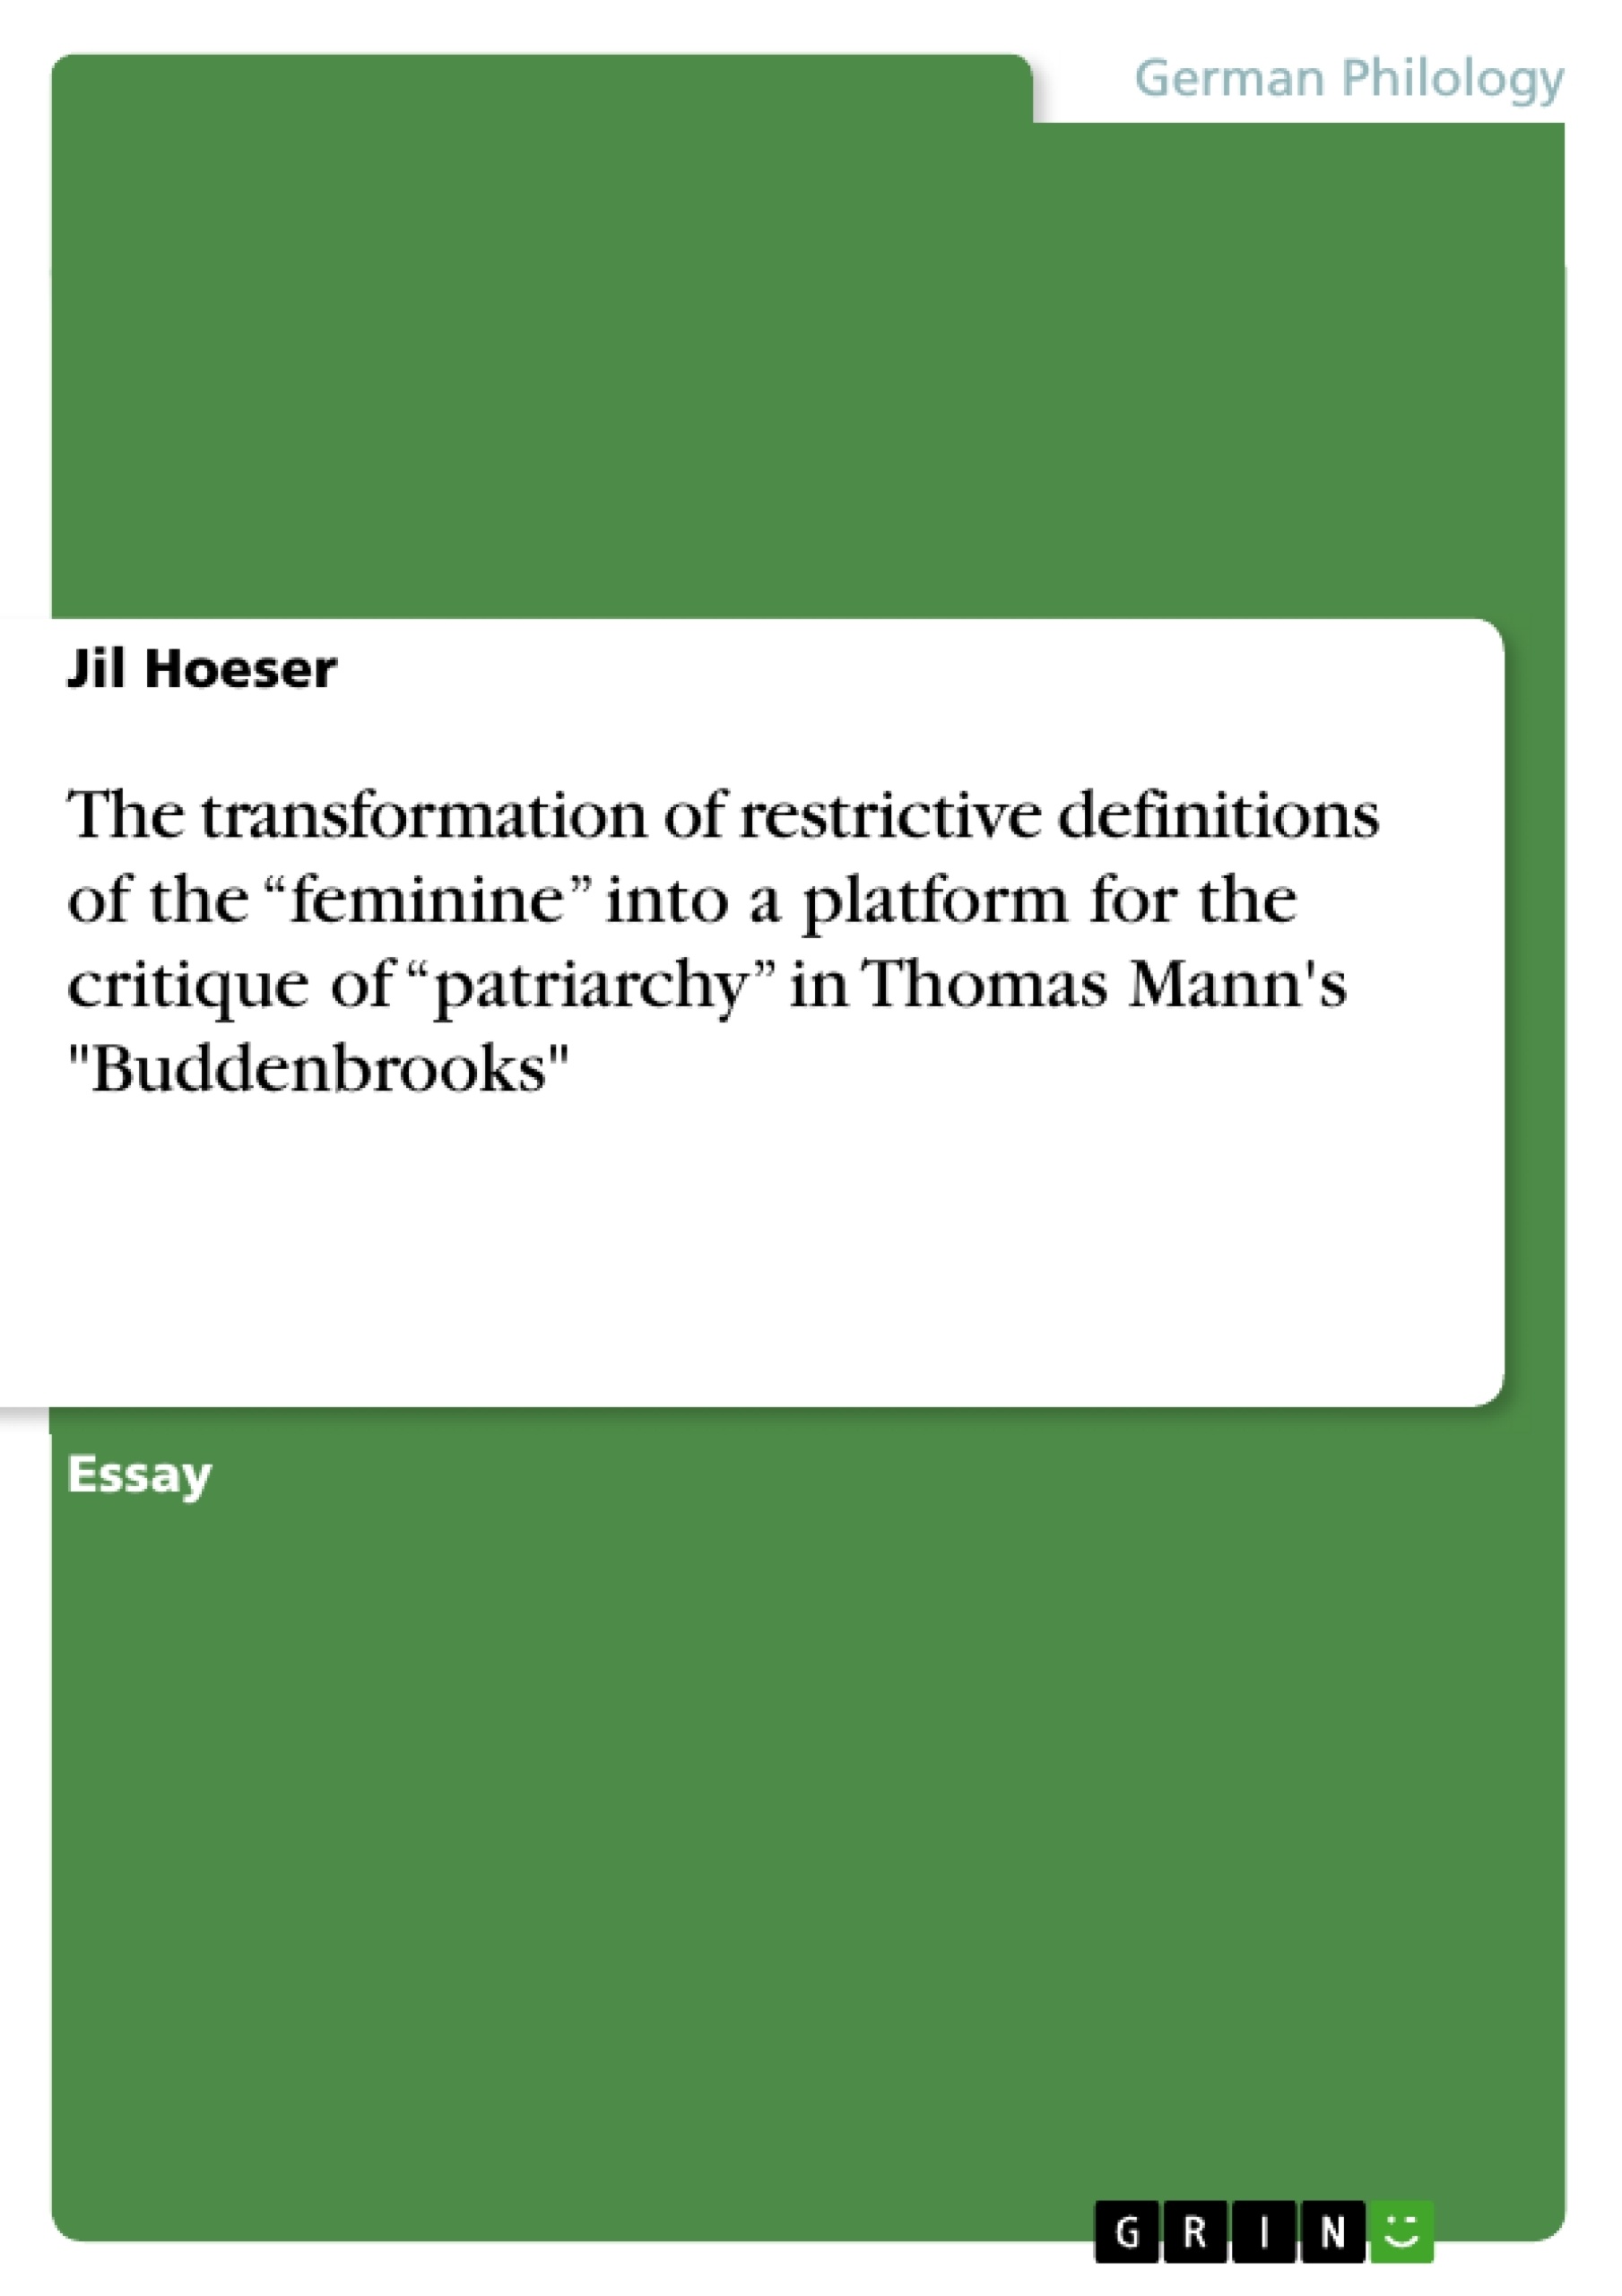 Title: The transformation of restrictive definitions of the “feminine” into a platform for the critique of “patriarchy” in Thomas Mann's "Buddenbrooks"